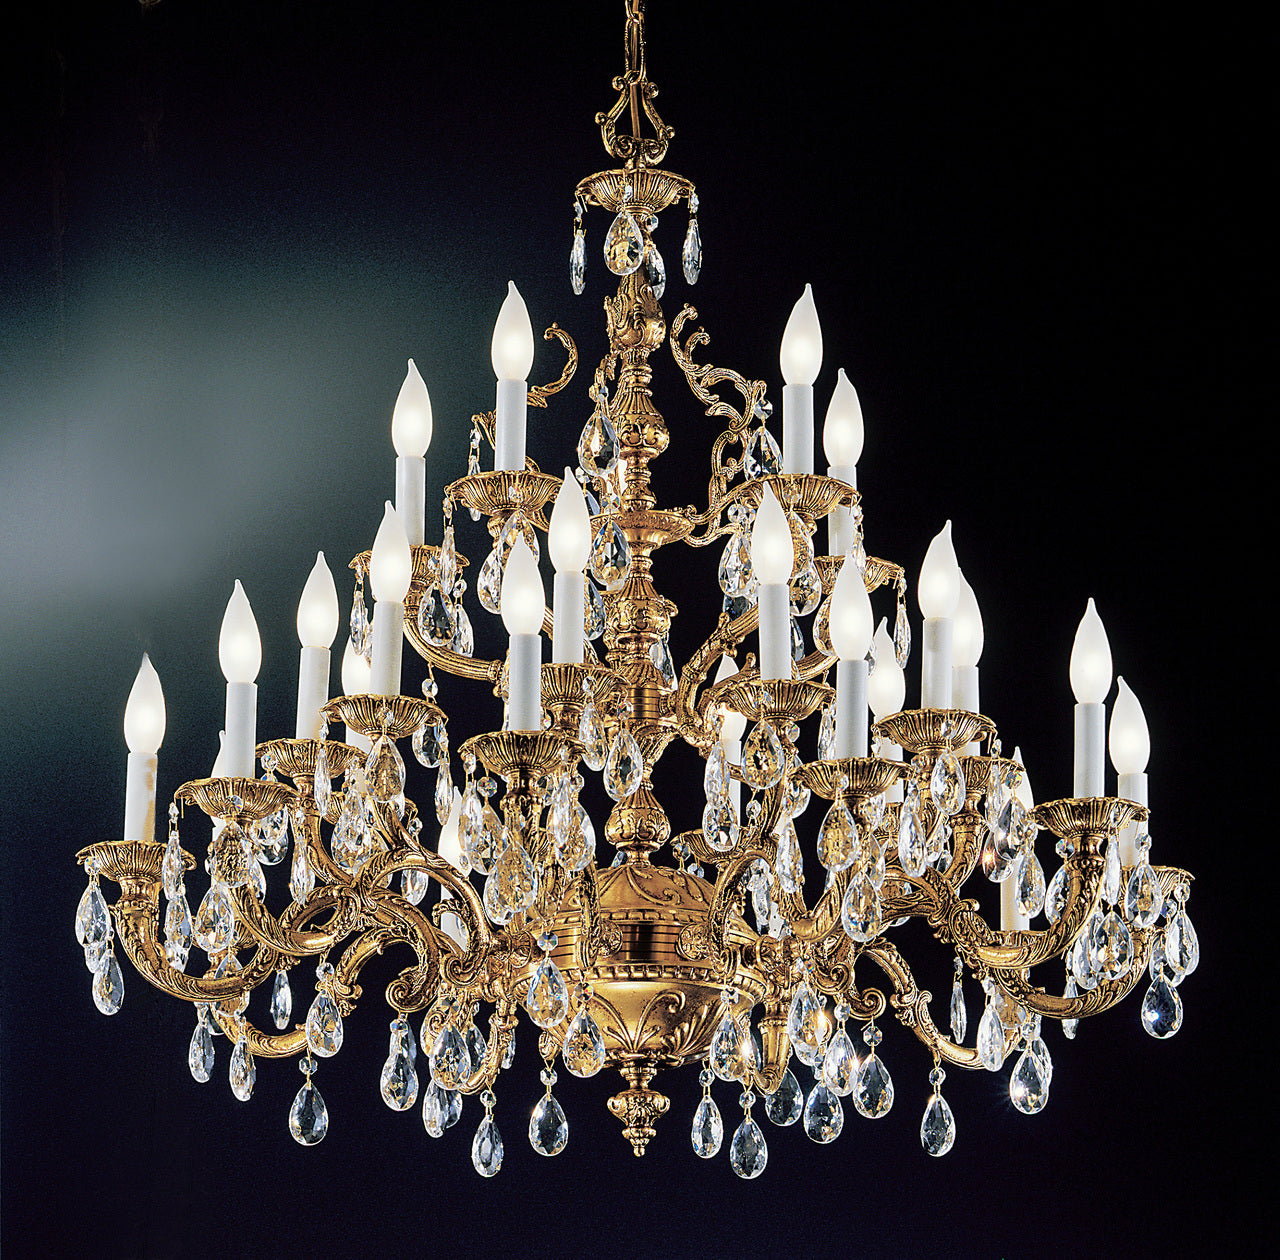 Classic Lighting 5525 OWB CGT Barcelona Crystal/Cast Brass Chandelier in Olde World Bronze (Imported from Spain)